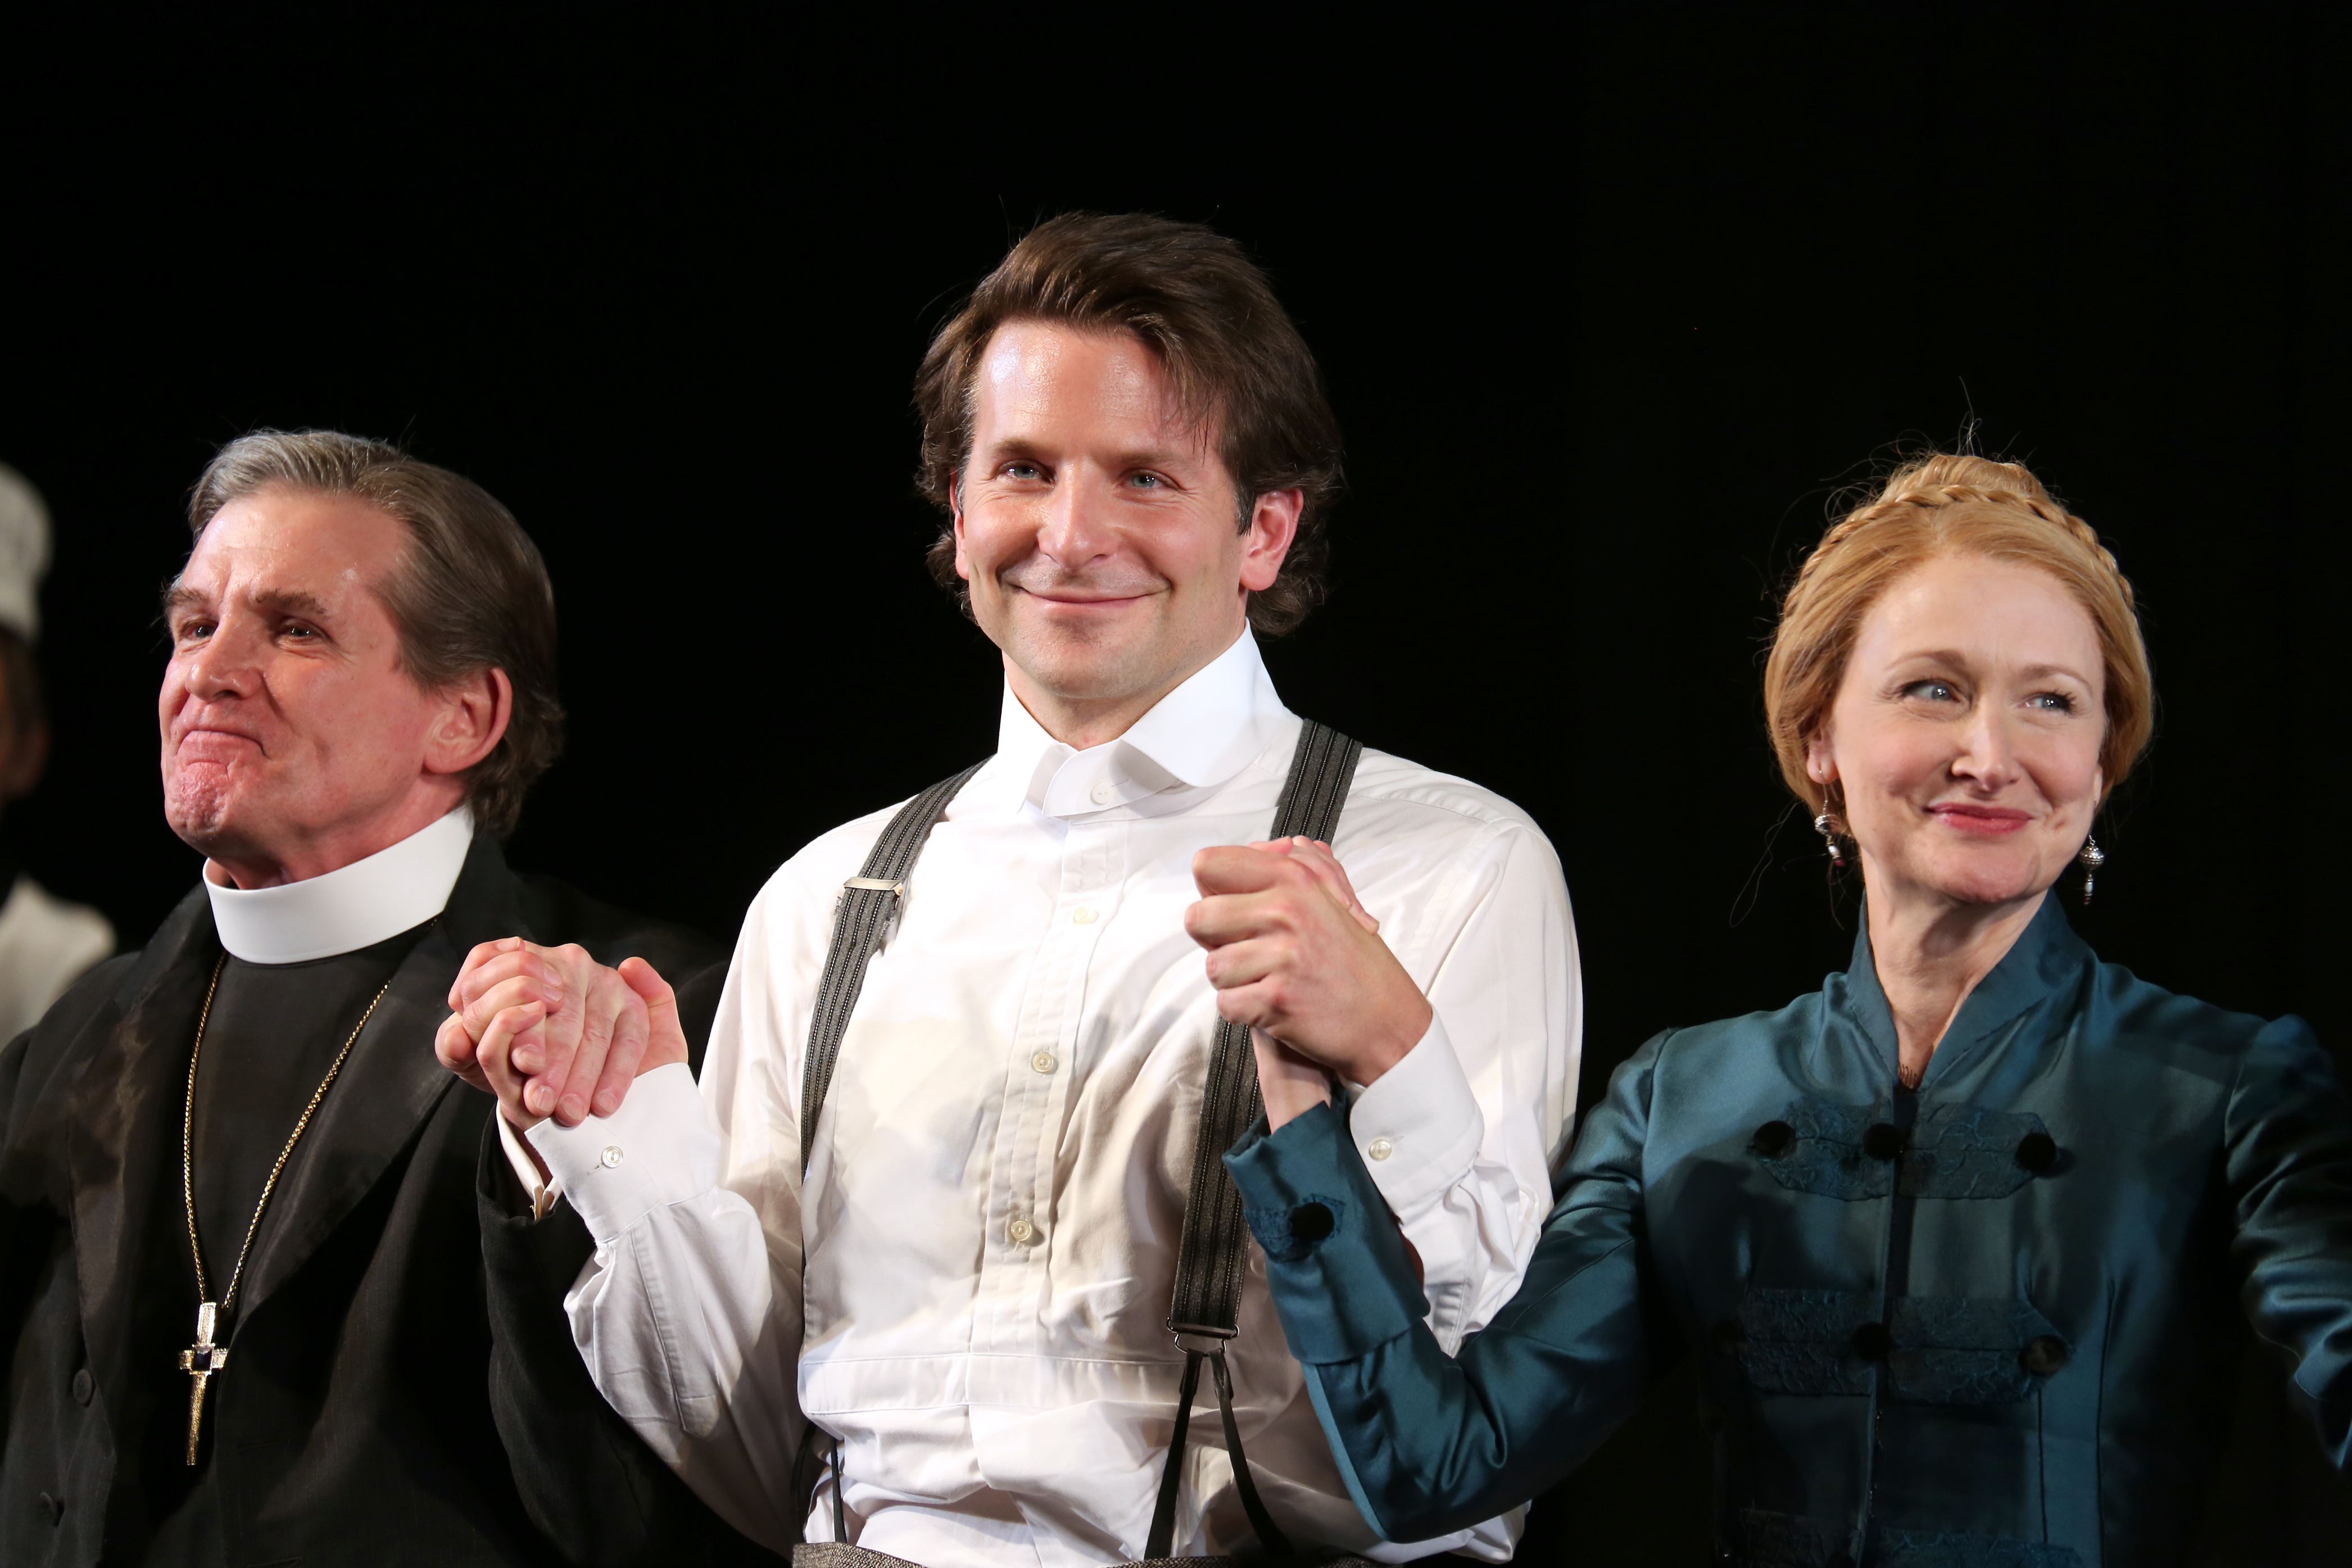 From left: Anthony Heald, Bradley Cooper and Patricia Clarkson during the Broadway Opening Night Performance Curtain Call for 'The Elephant Man' on Dec. 7, 2014 in New York City.